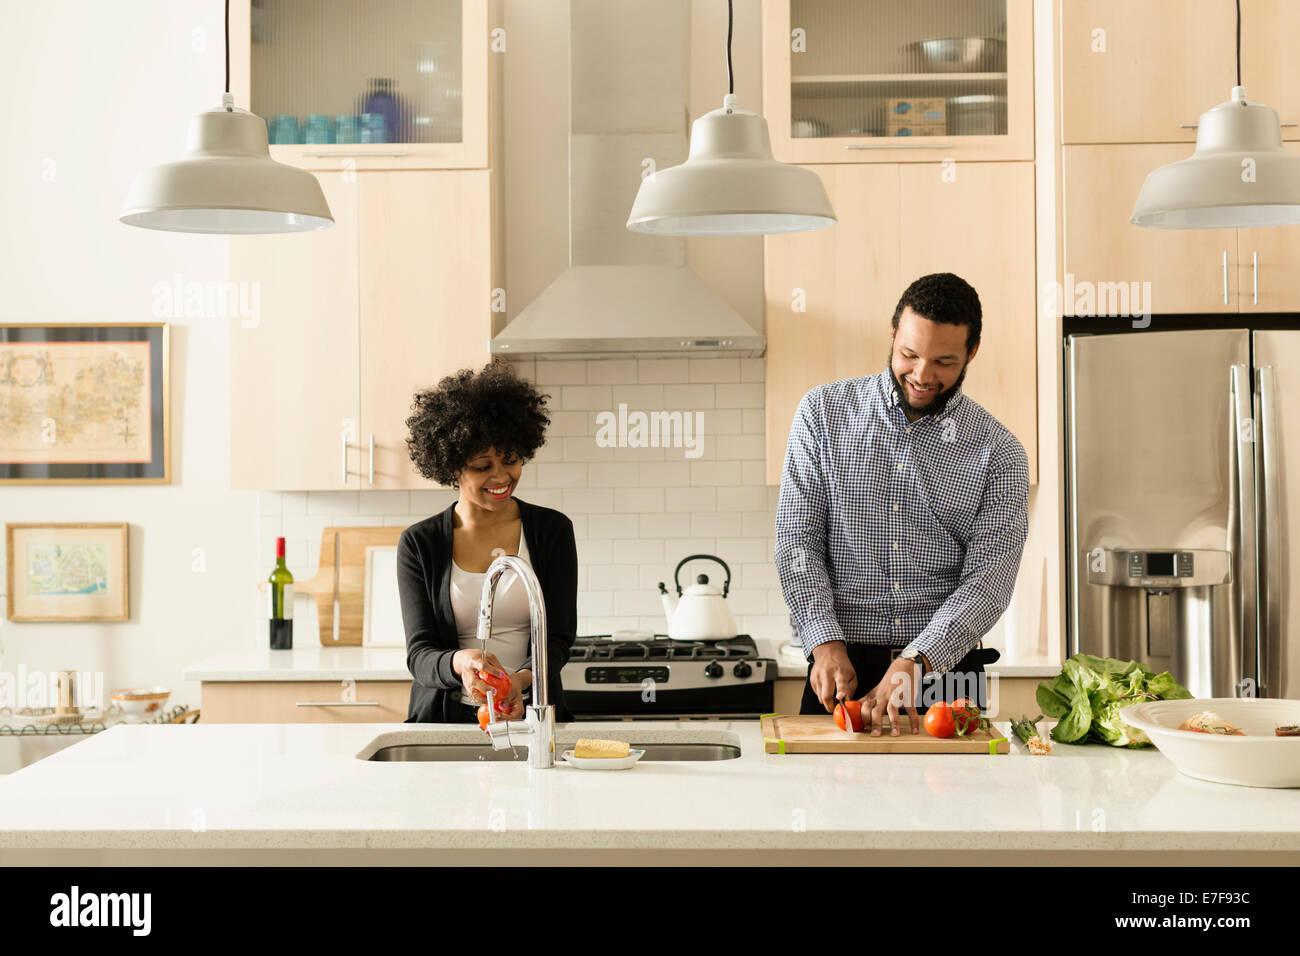 Mixed Race couple cooking together in kitchen Banque D'Images